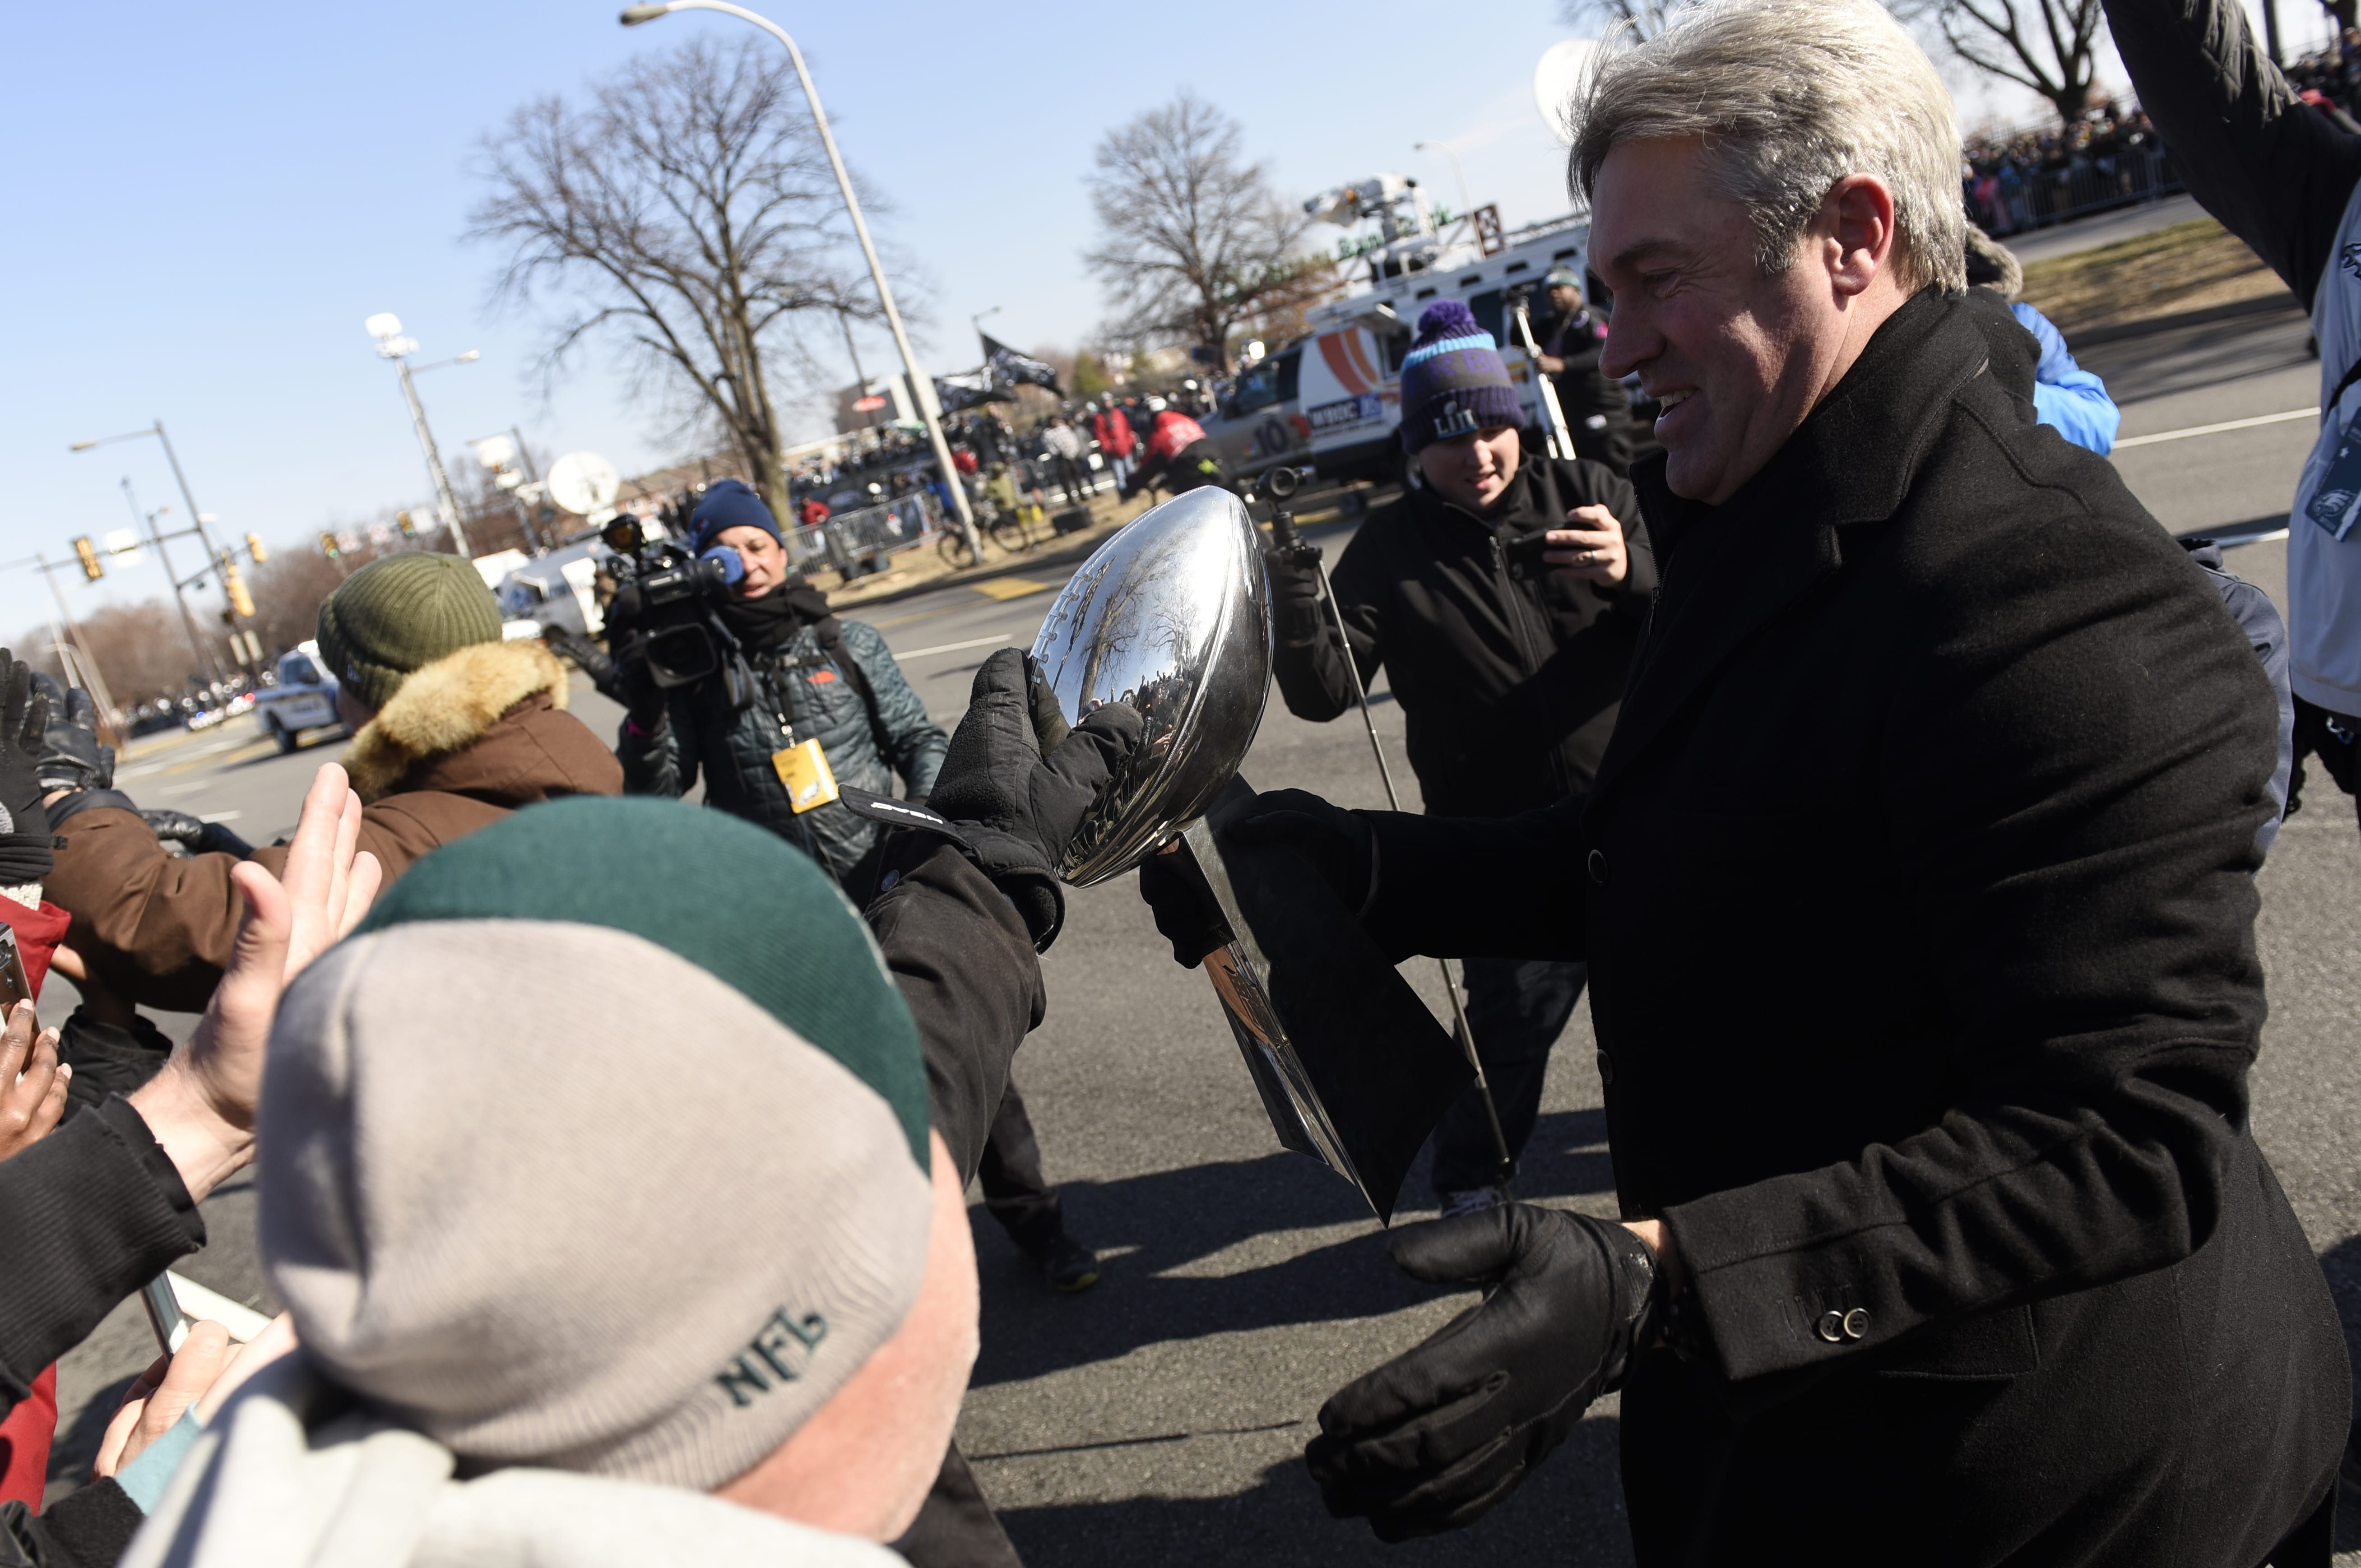 A fan reaches out to touch the Lombardi Trophy carried by Philadelphia Eagles NFL football team head coach Doug Pederson during the Super Bowl LII victory parade, Thursday, Feb 8, 2018, in Philadelphia.